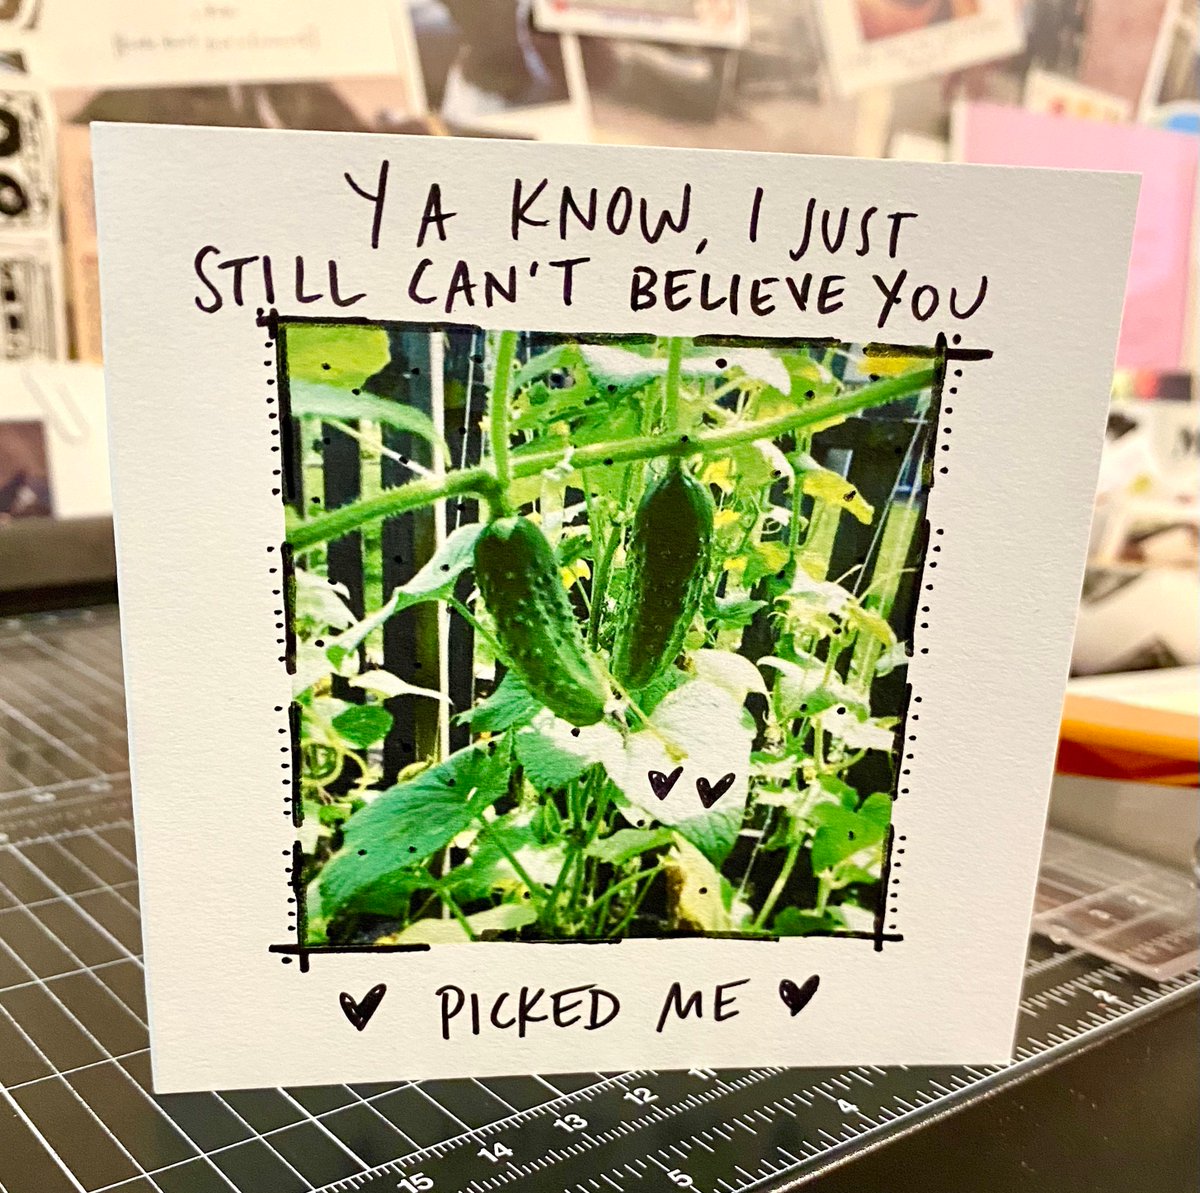 Excited to share the latest addition to my #etsy shop: You Picked Me! Anniversary Card, Pickle Card etsy.me/3CH4NP6 #anniversary #paperanniversary #youpickedme #anniversaryforhim #anniversaryforwife #oneyearanniversary #funnylovecard #handmadegreeting #uniquelo